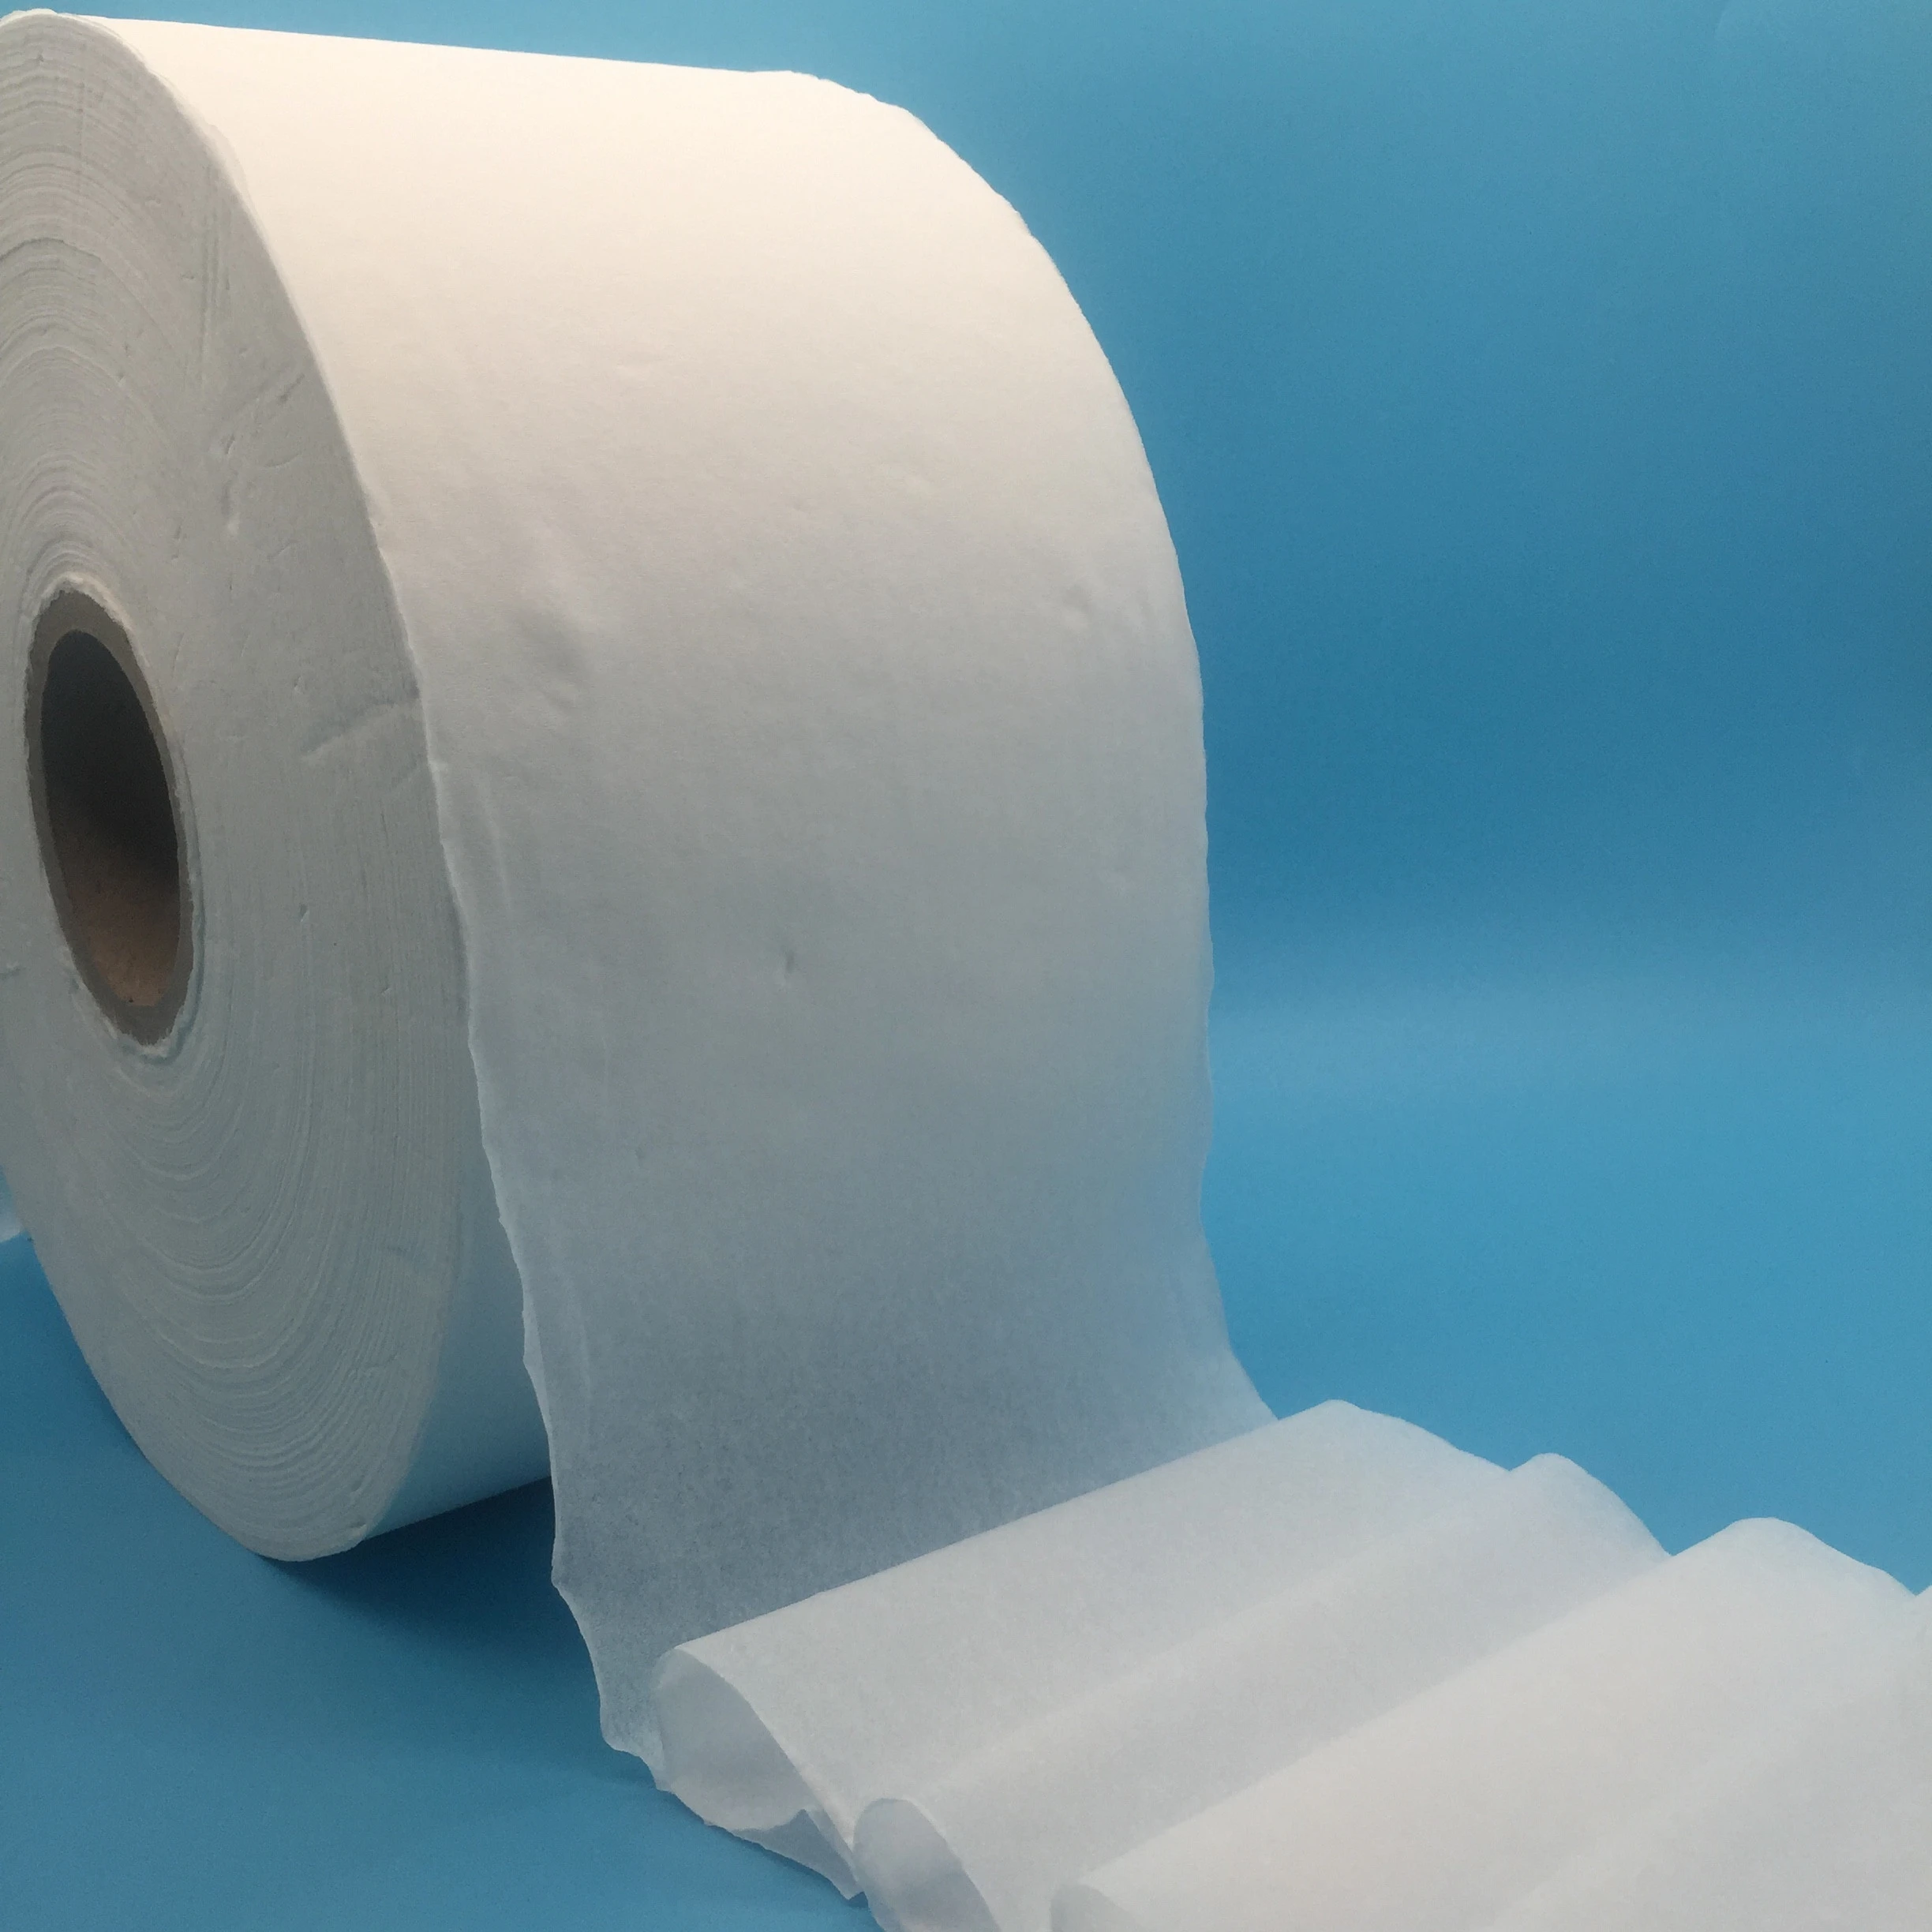 Degradable ladies sanitary pads raw material Printed or Non-printed Jumbo Roll Tissue Paper